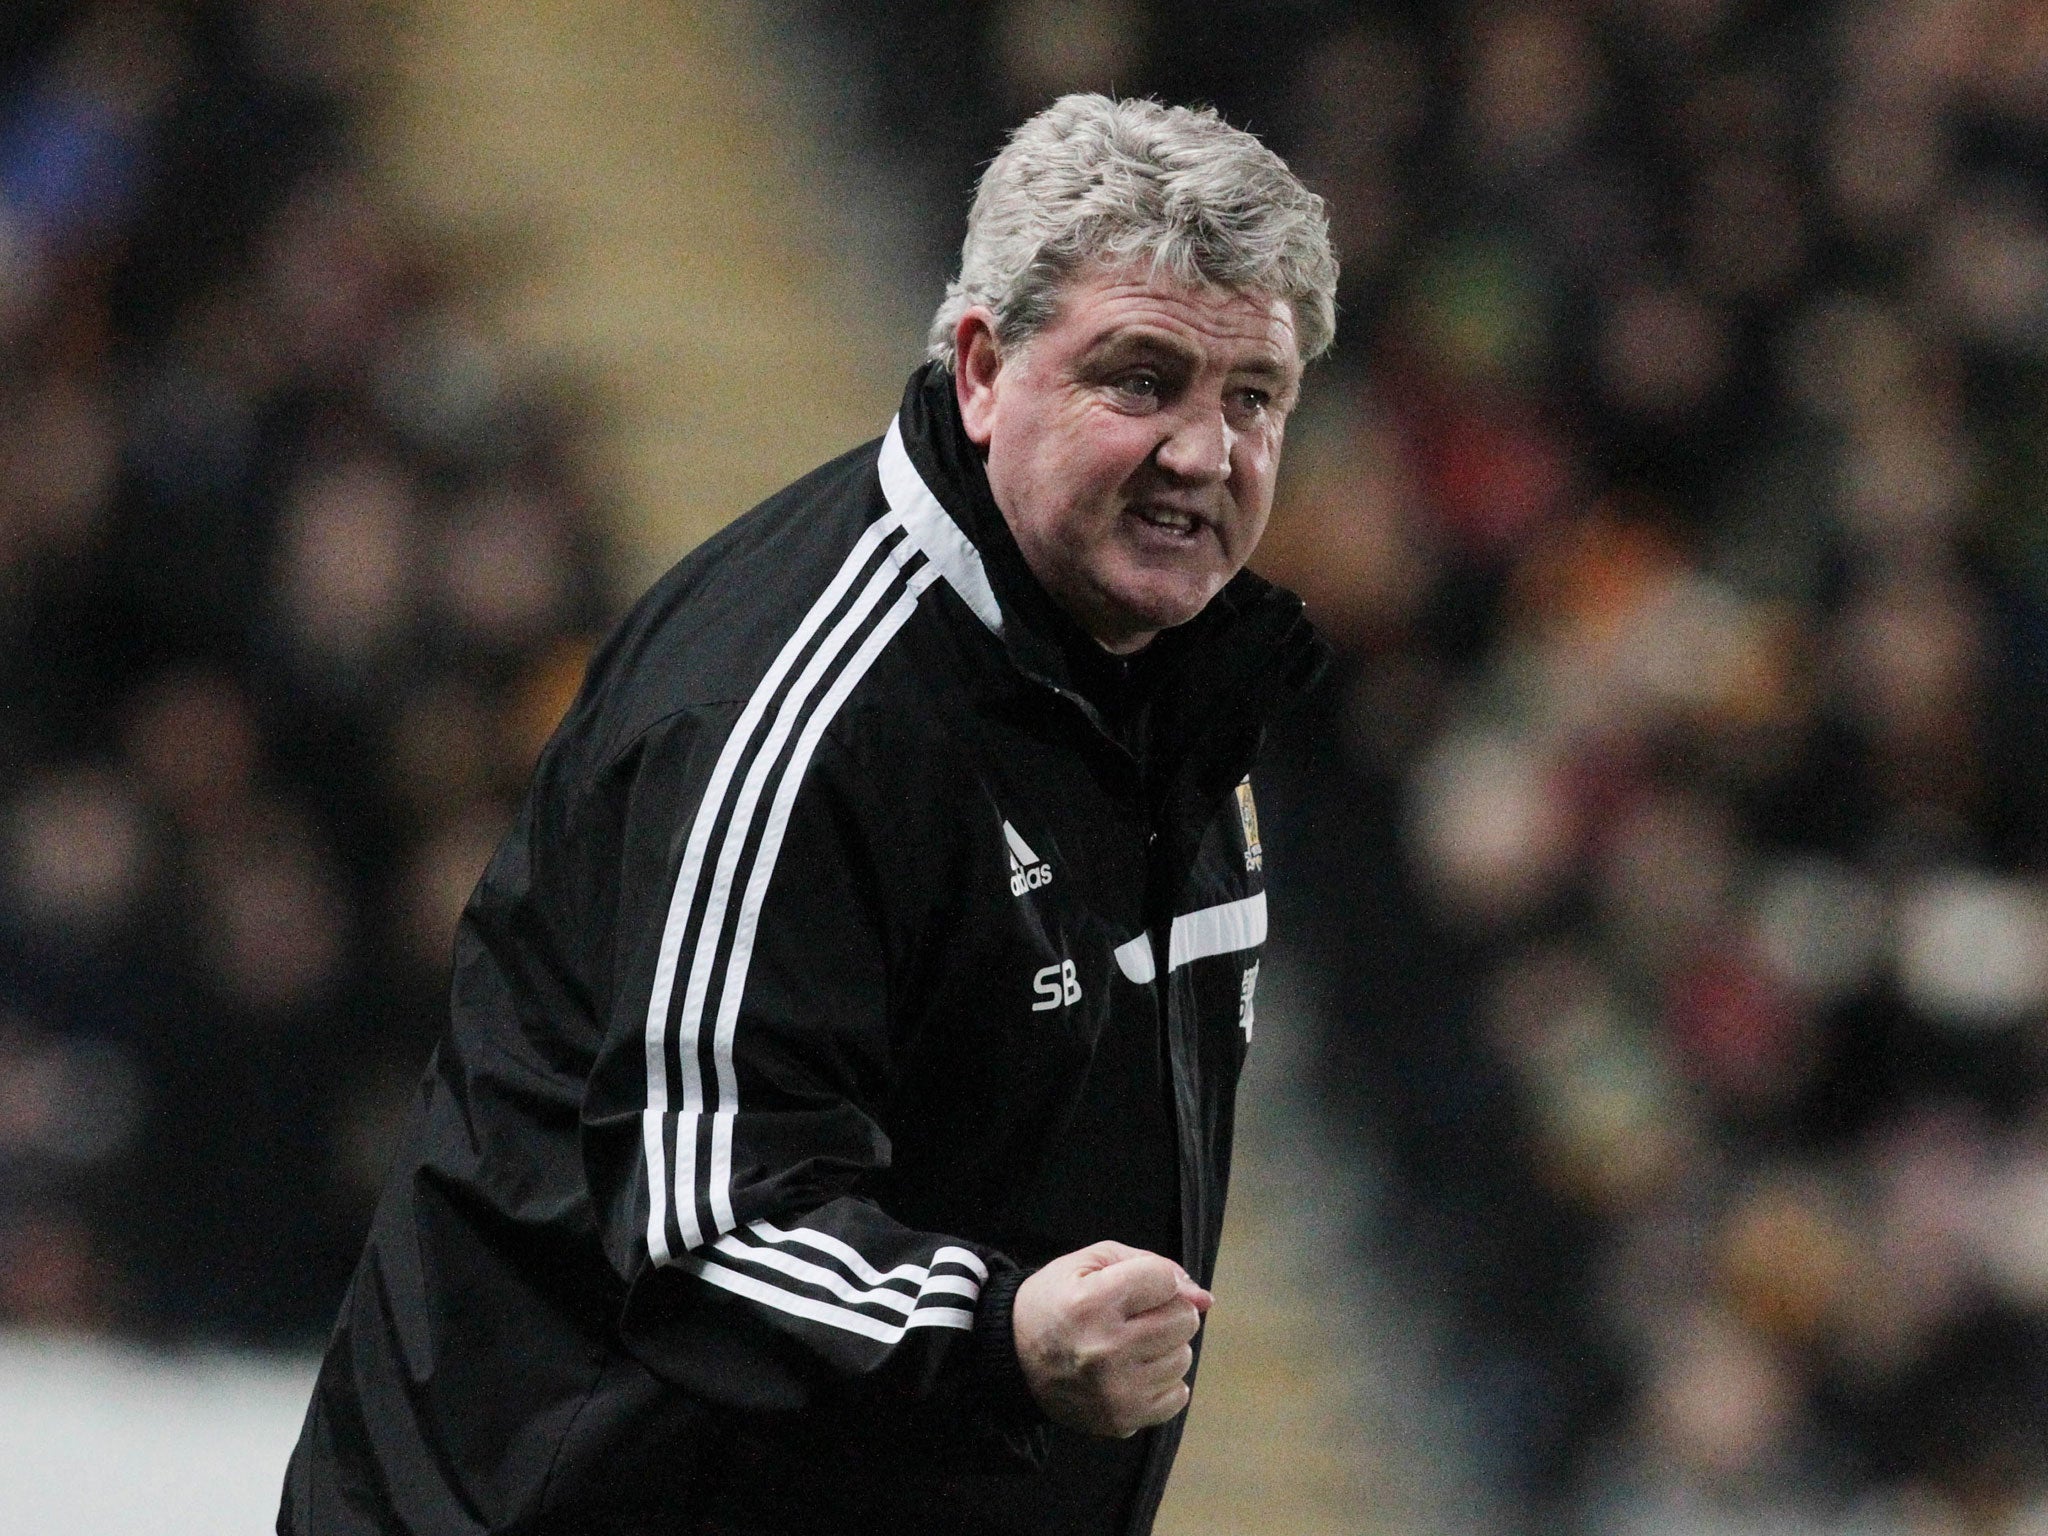 Steve Bruce makes a gesture from the touchline